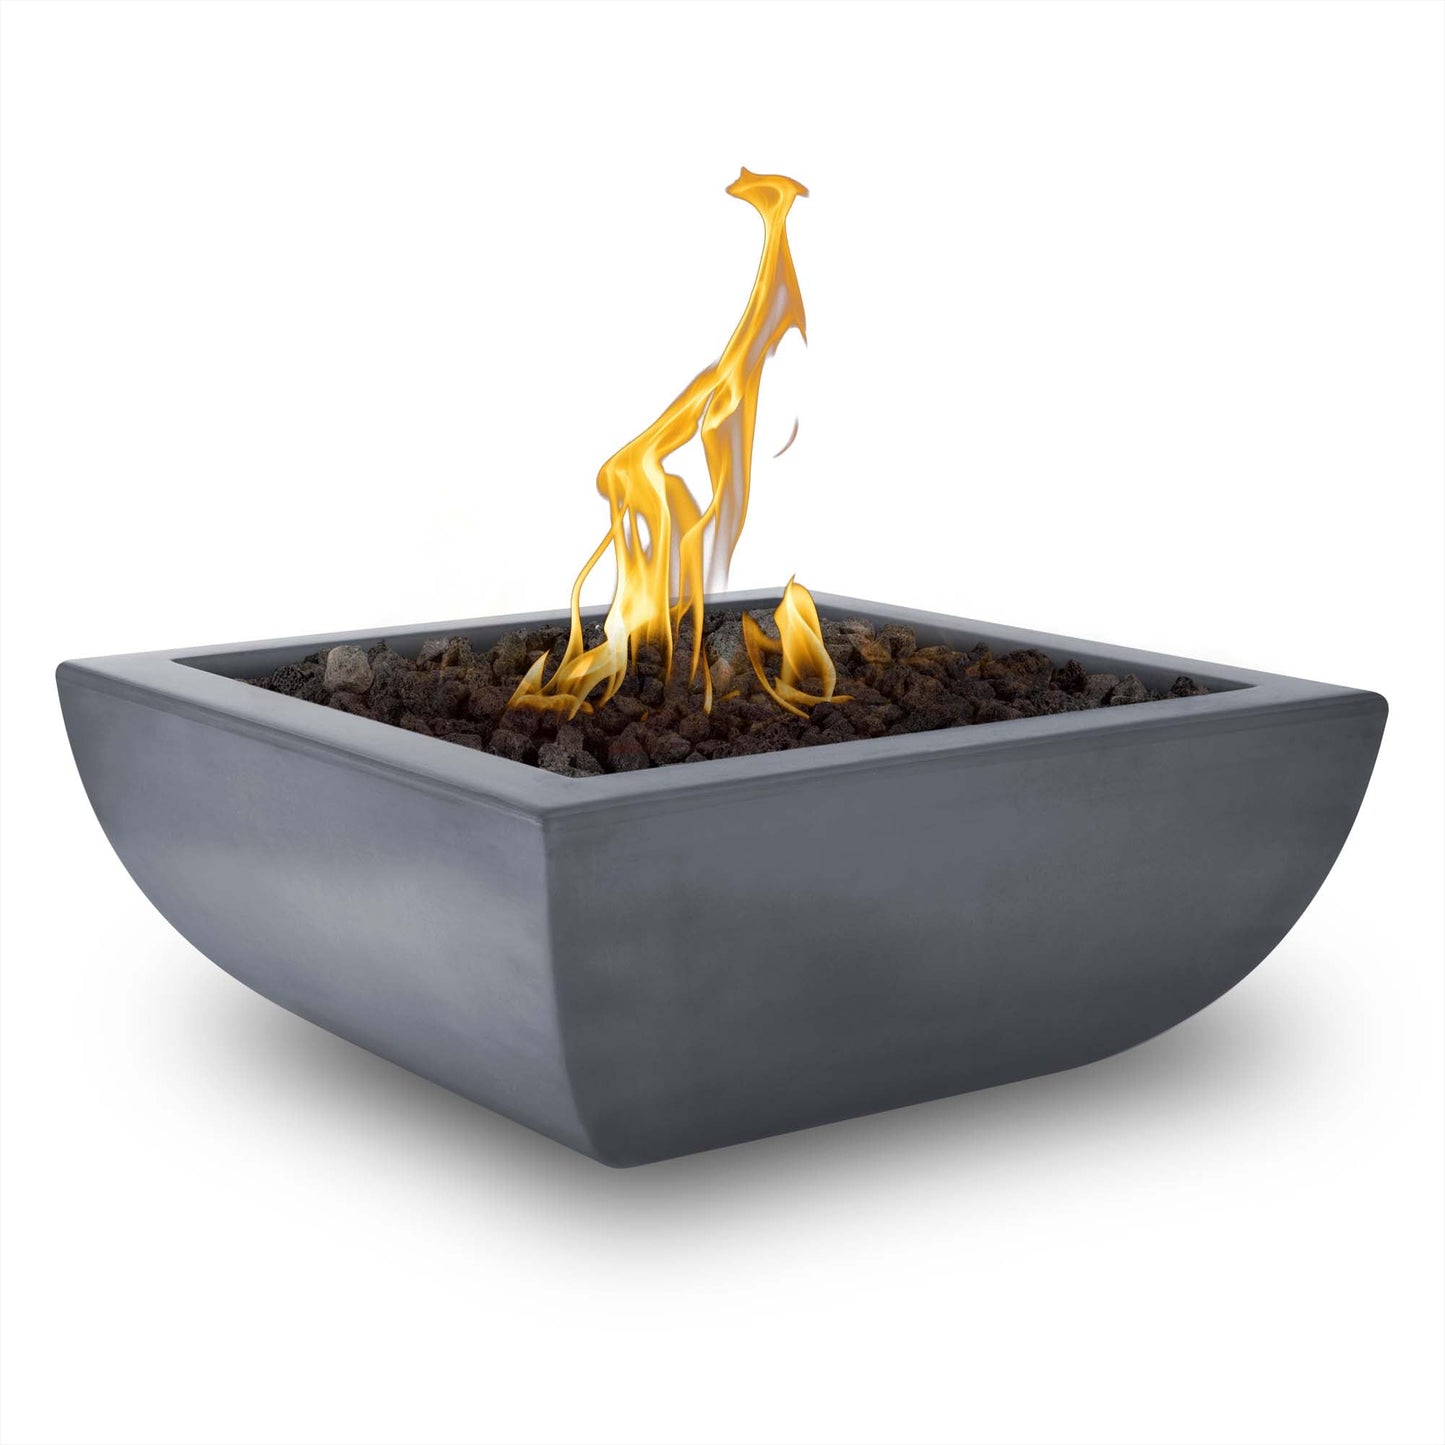 The Outdoor Plus Square Avalon 36" Rustic White GFRC Concrete Liquid Propane Fire Bowl with Match Lit with Flame Sense Ignition